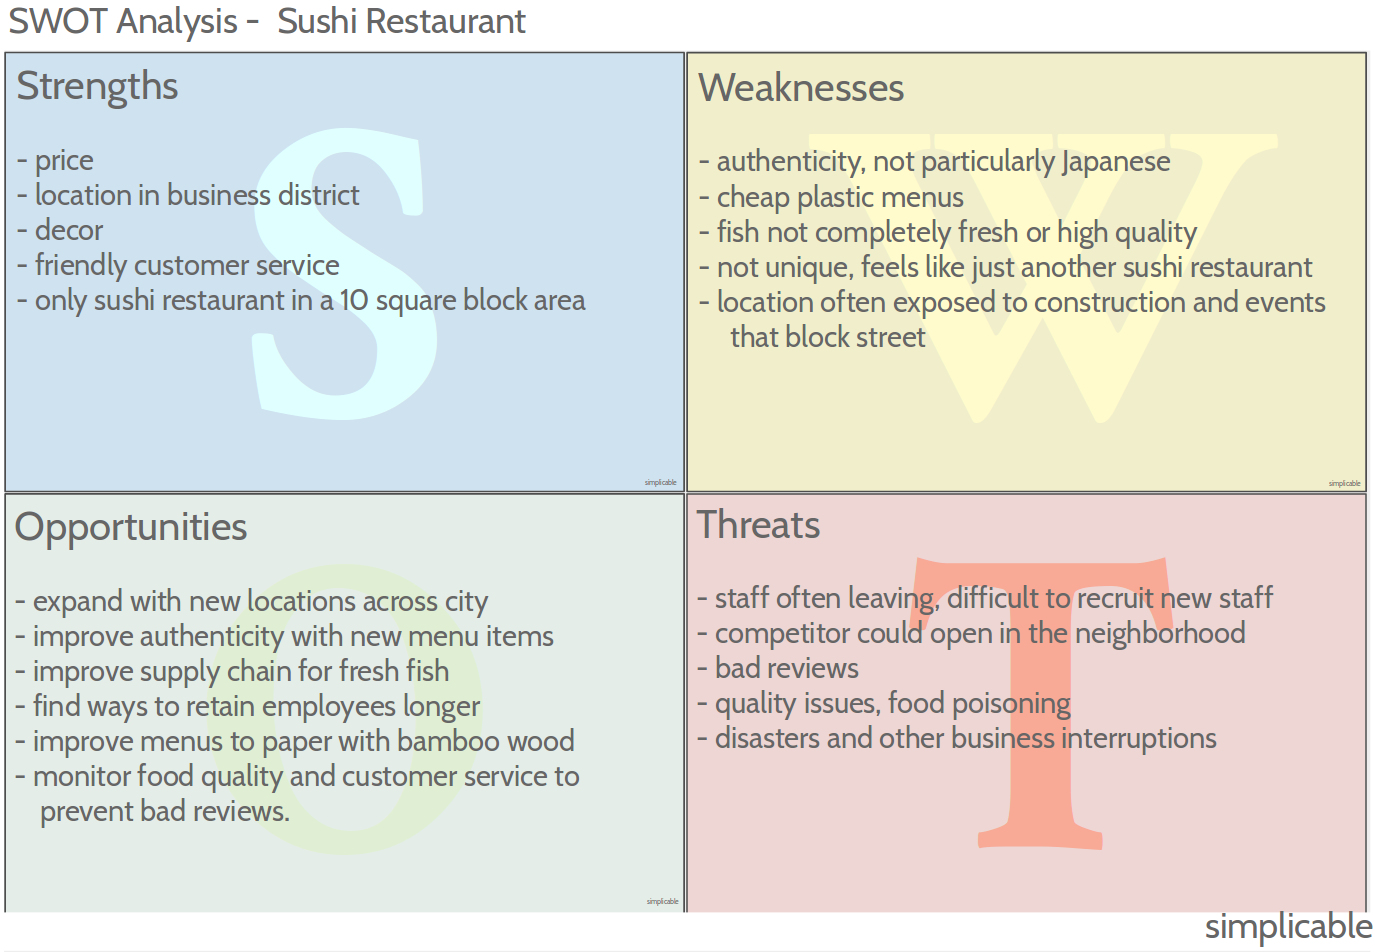 Example of a swot analysis for a sushi restaurant that doesn't have much of a competitive advantage but competes on price and location.